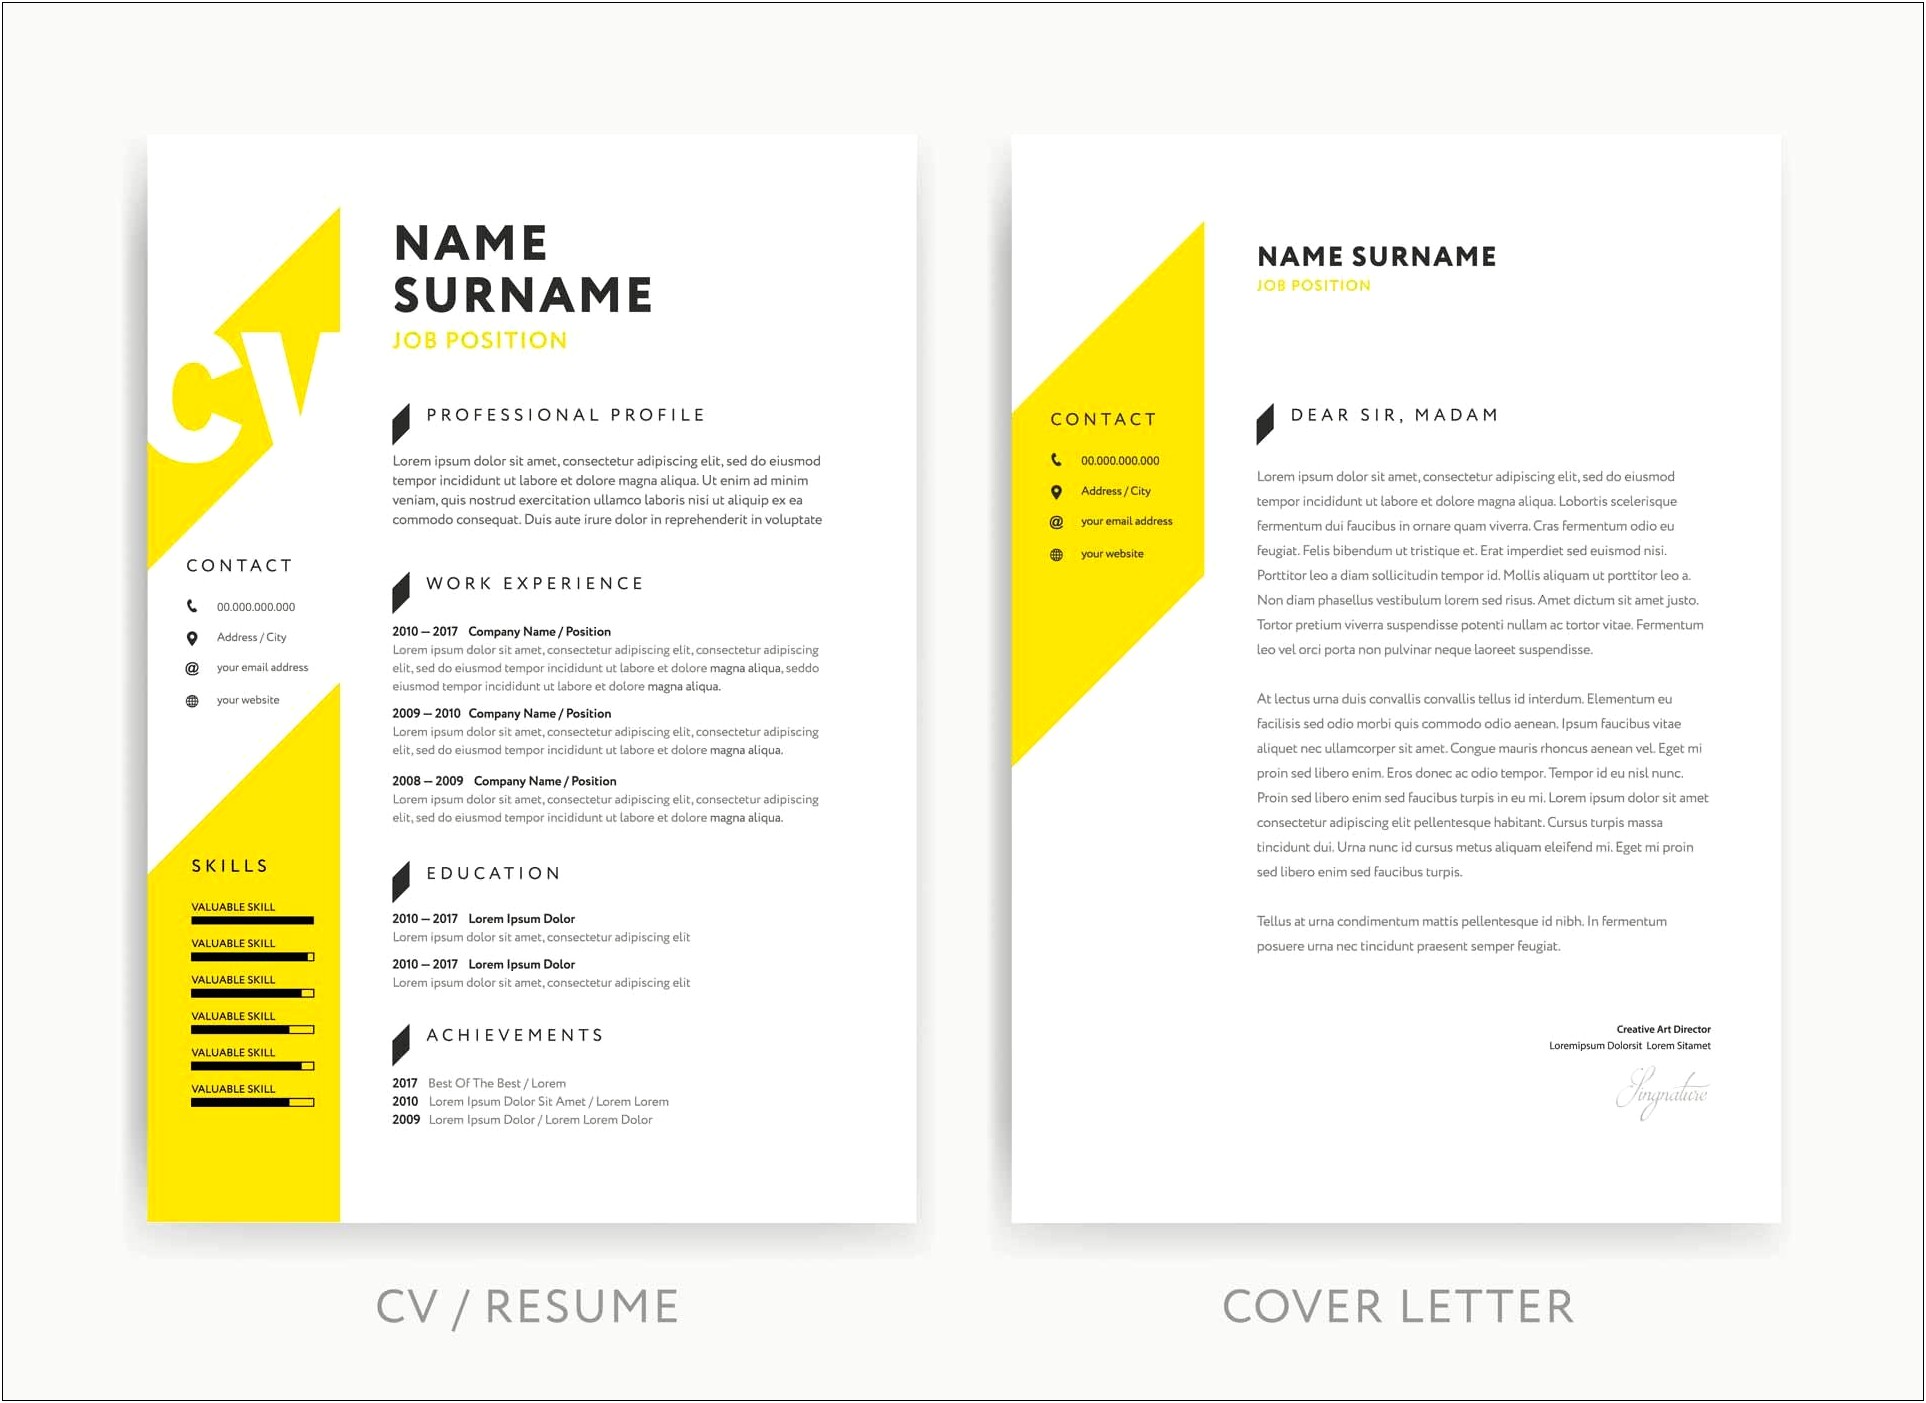 Examples Of Cover Letters For Resumes Australia